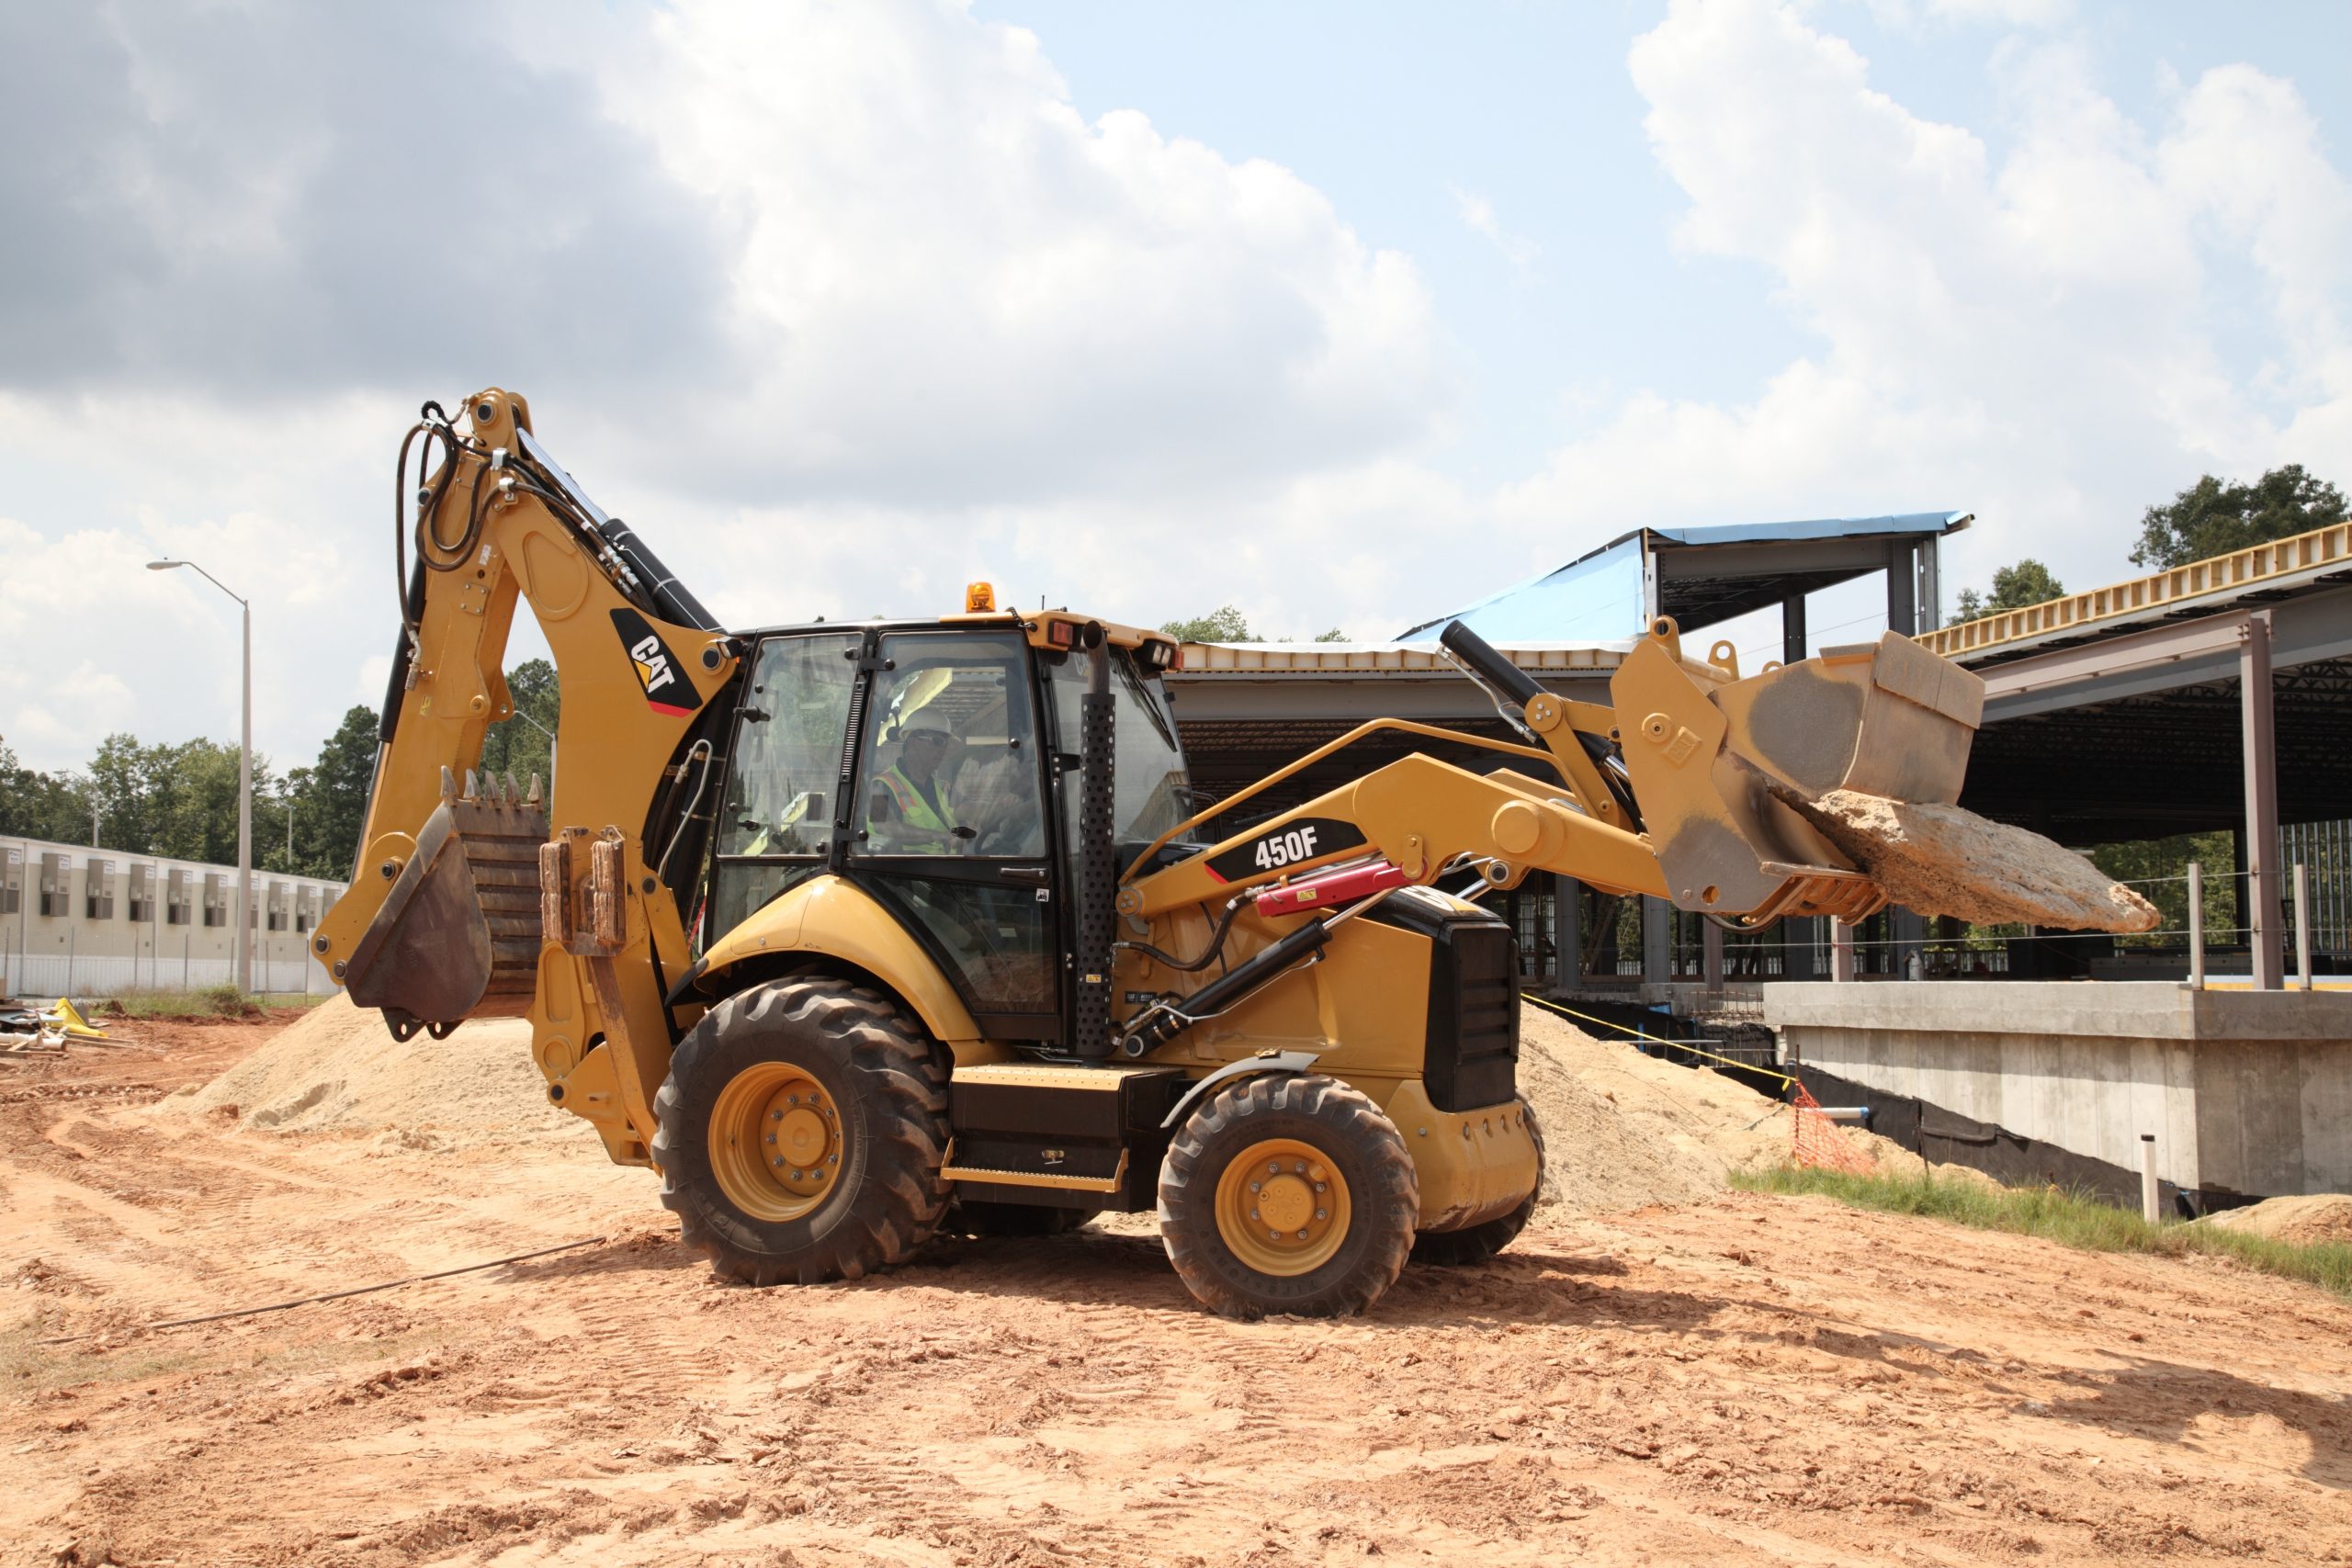 Backhoe Loader picking up a piece of stone